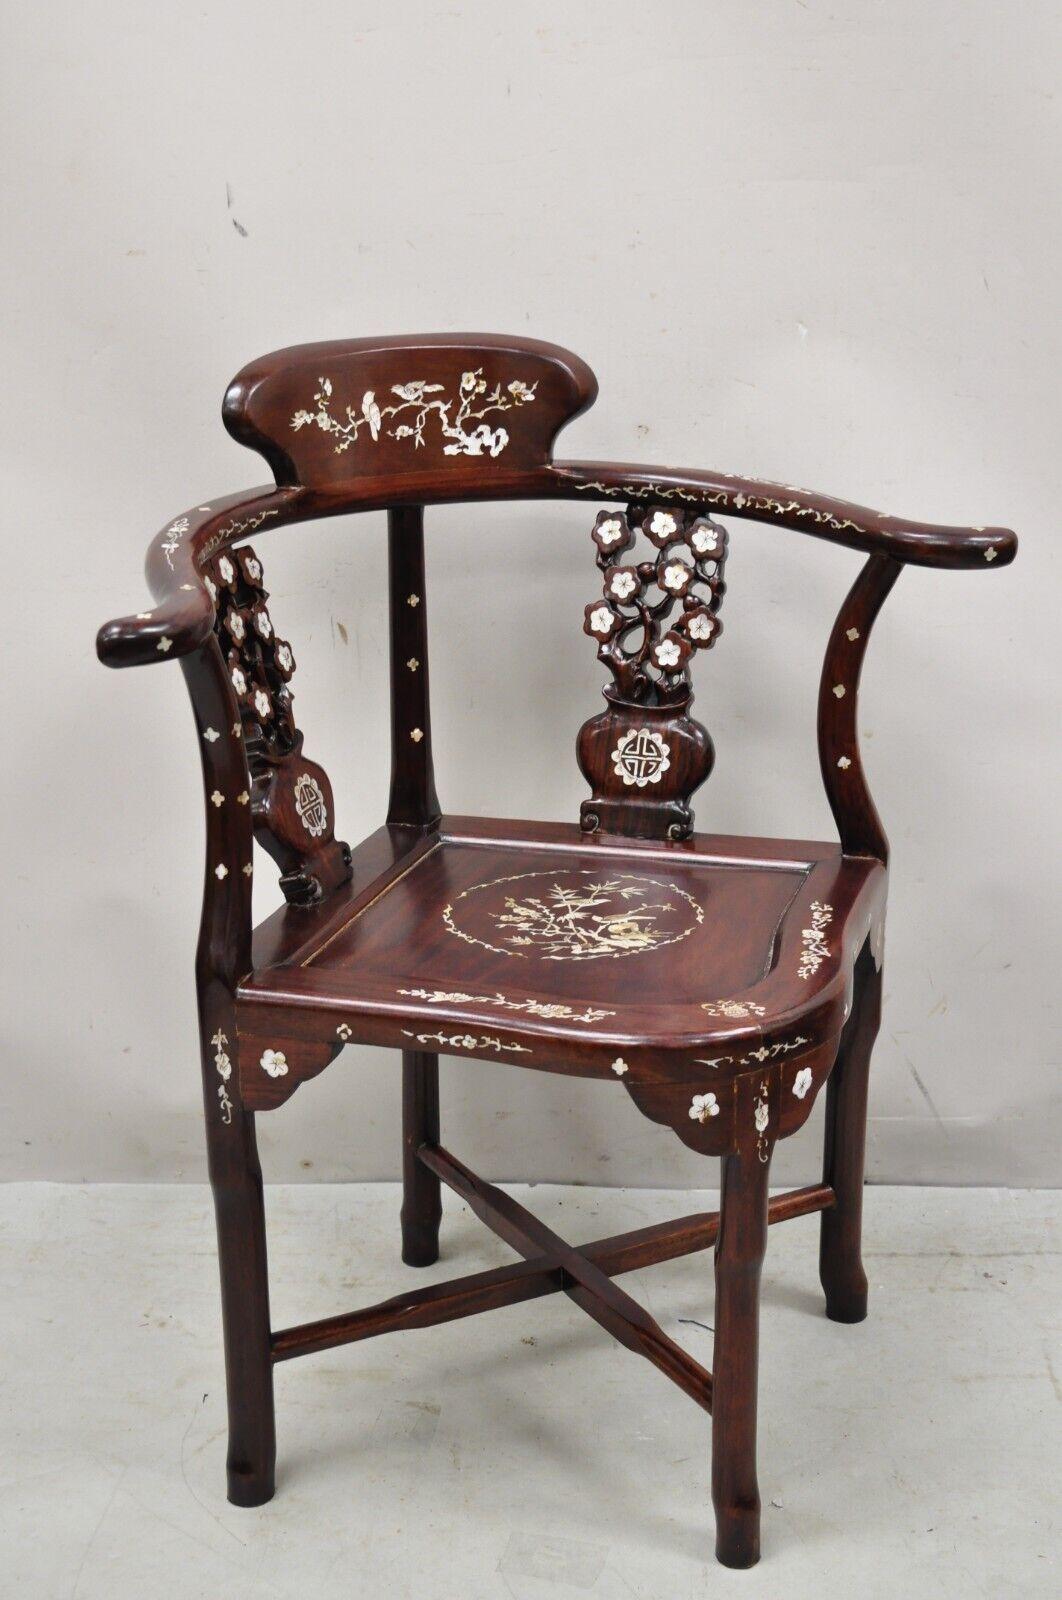 Vintage Chinese Carved Hardwood Corner Lounge chair with Mother of Pearl Inlay. Item features Impressive mother of pearl inlay throughout, stretcher base, solid wood construction, beautiful wood grain, very nice vintage item. Circa Mid to Late 20th